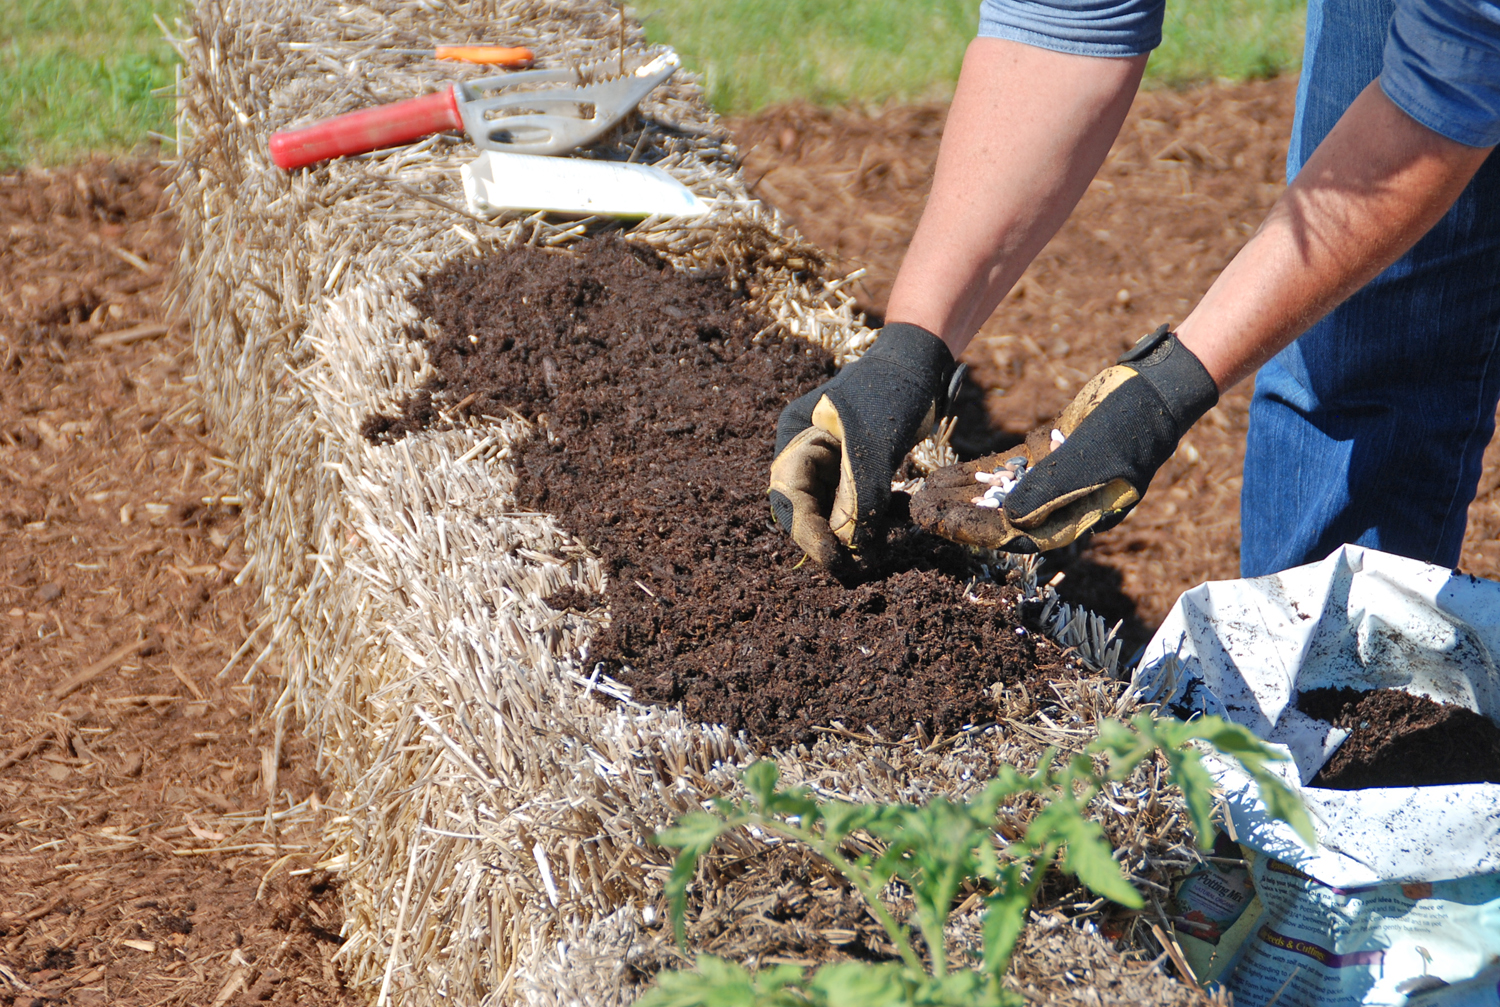 Garden Anywhere This Season With the Help of Straw Bale Gardening